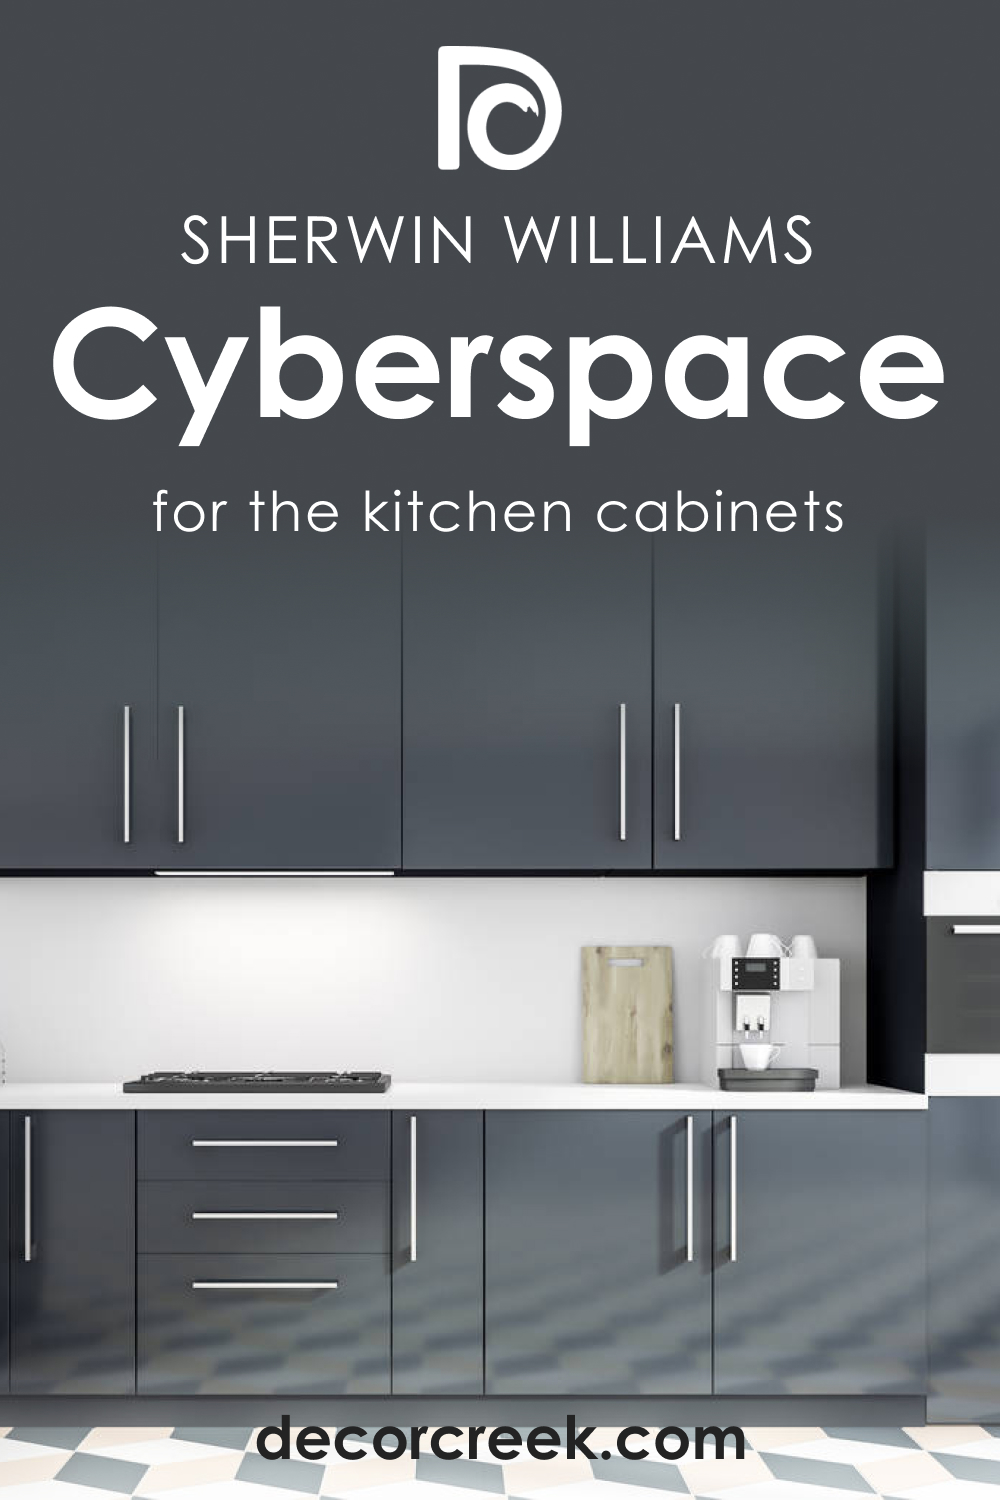 How to Use SW 7076 Cyberspace for the Kitchen Cabinets?